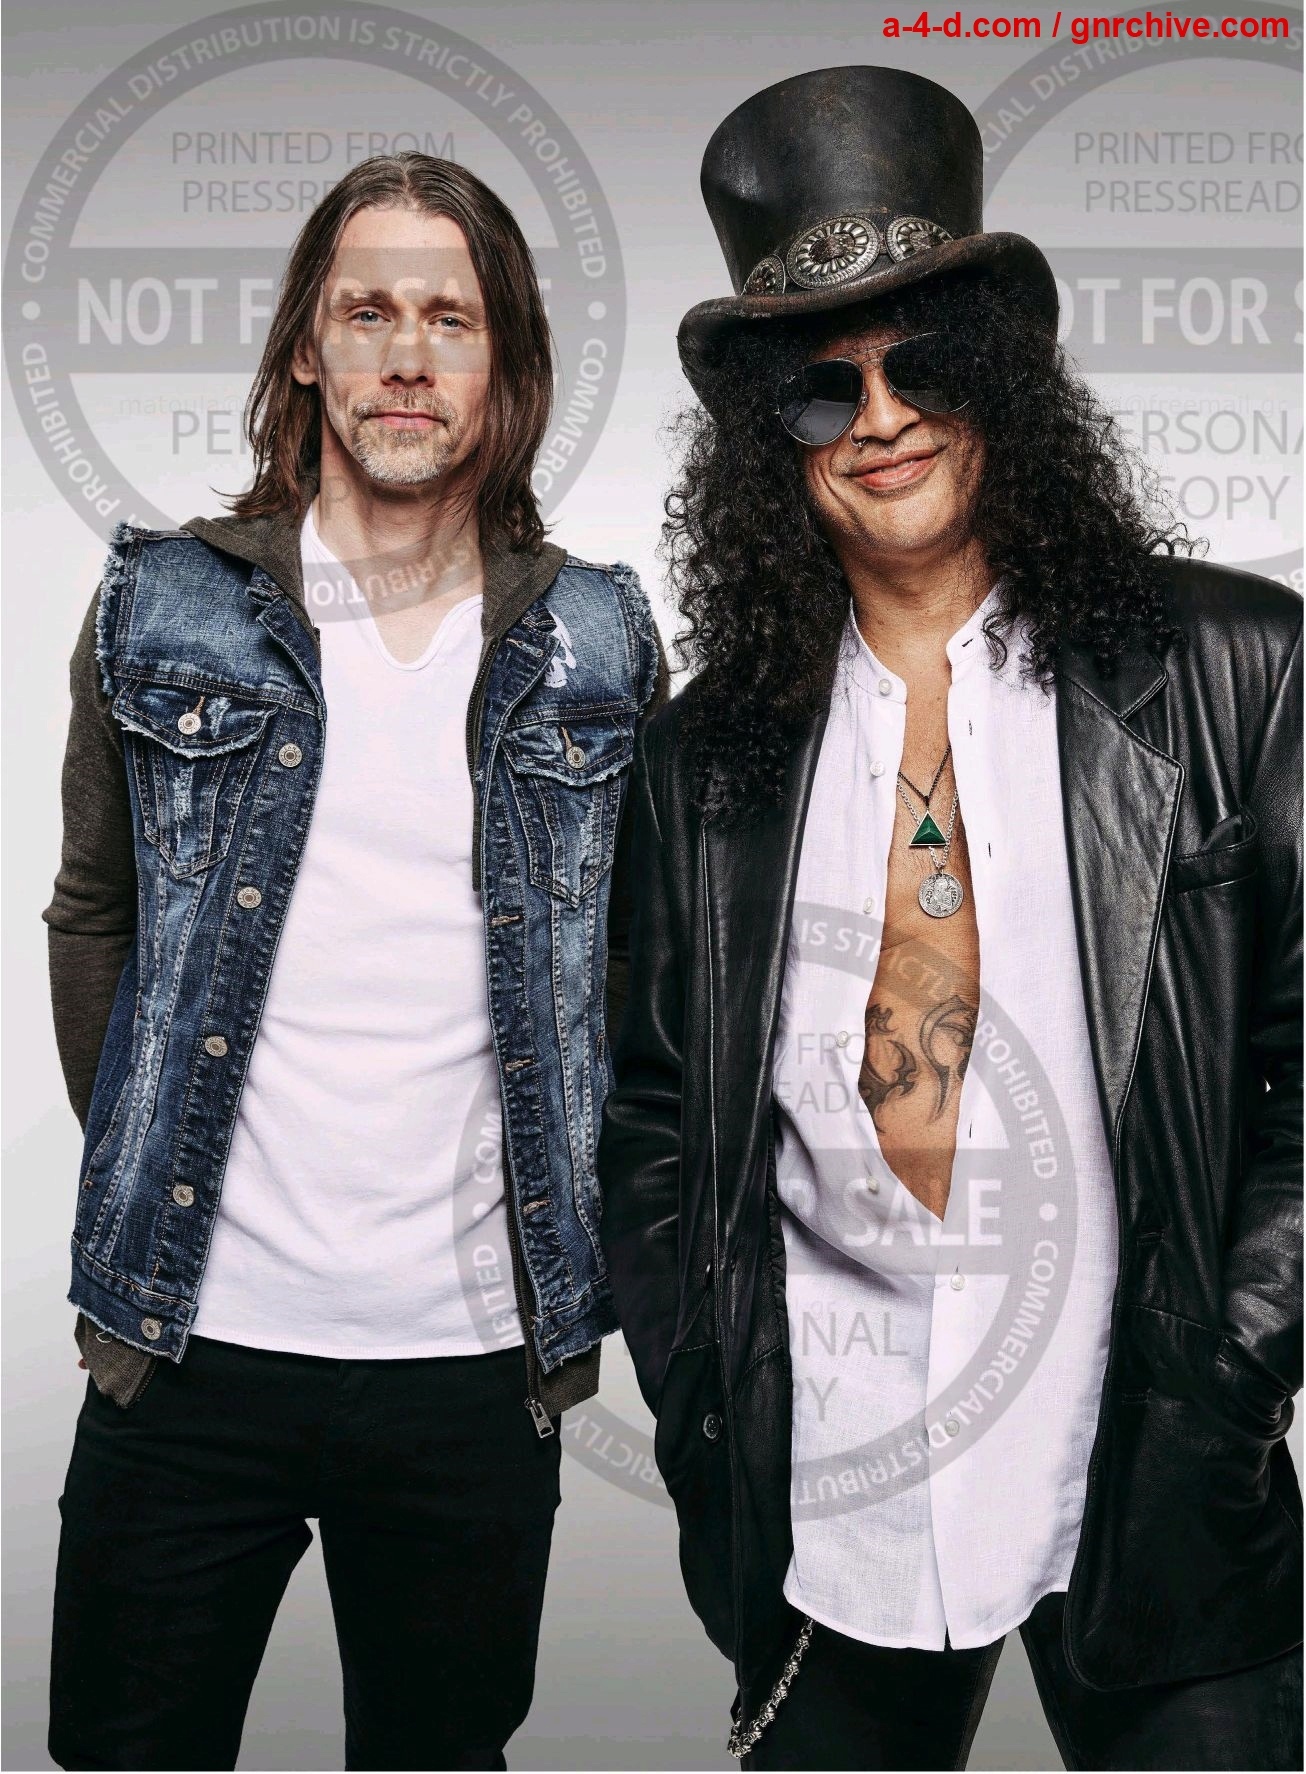 2022.02.DD - Classic Rock - Interview with Slash 2022_020